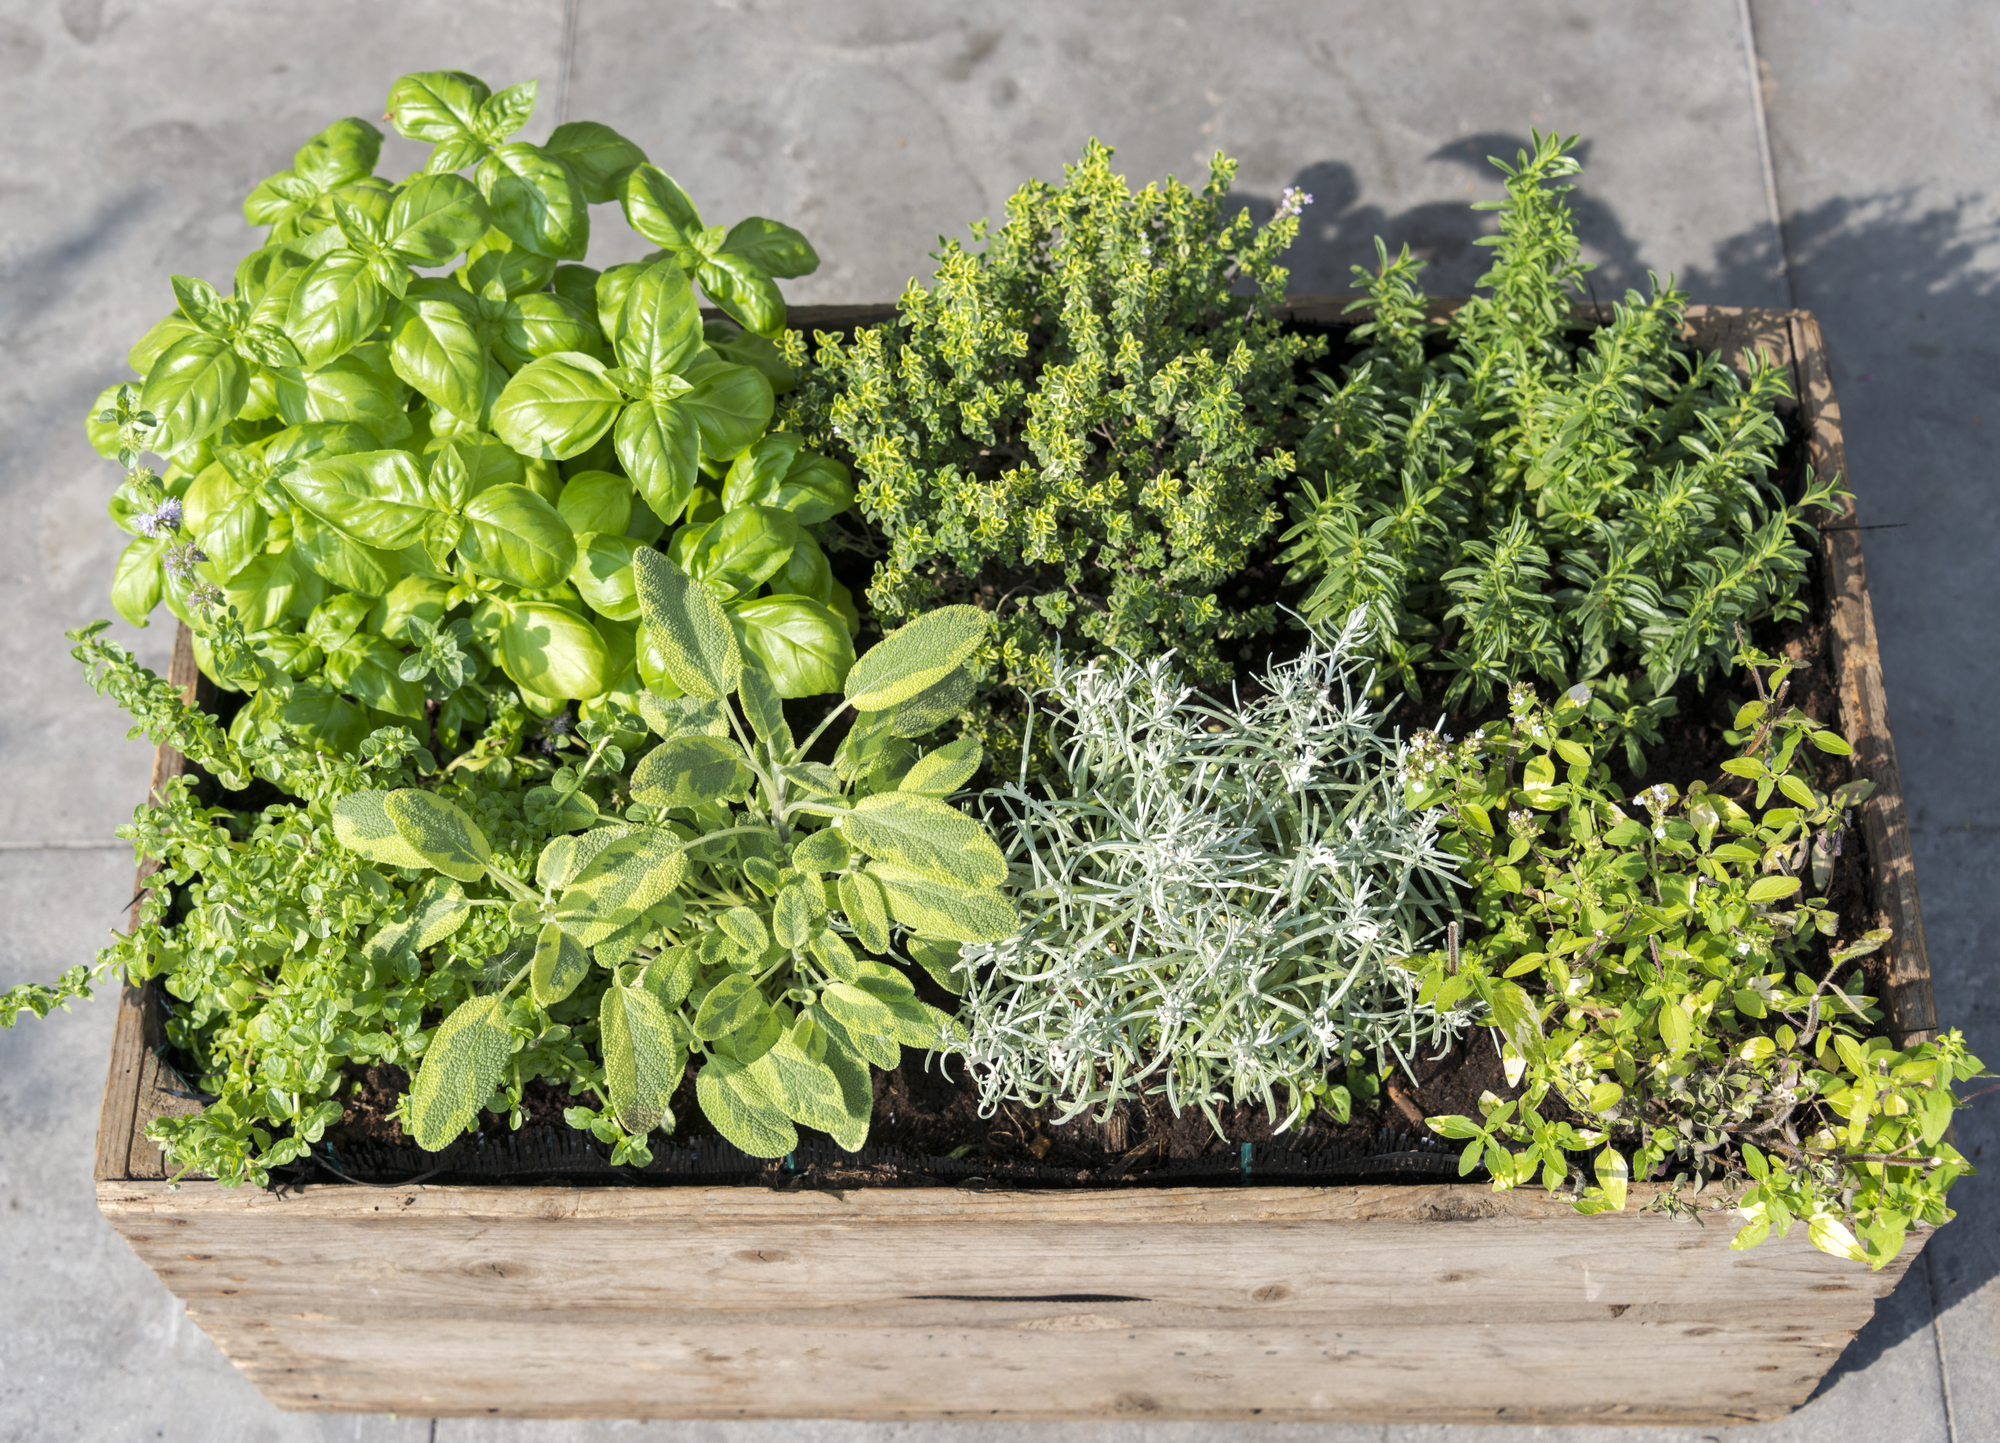 What Herbs Can Be Planted Together In A Container?